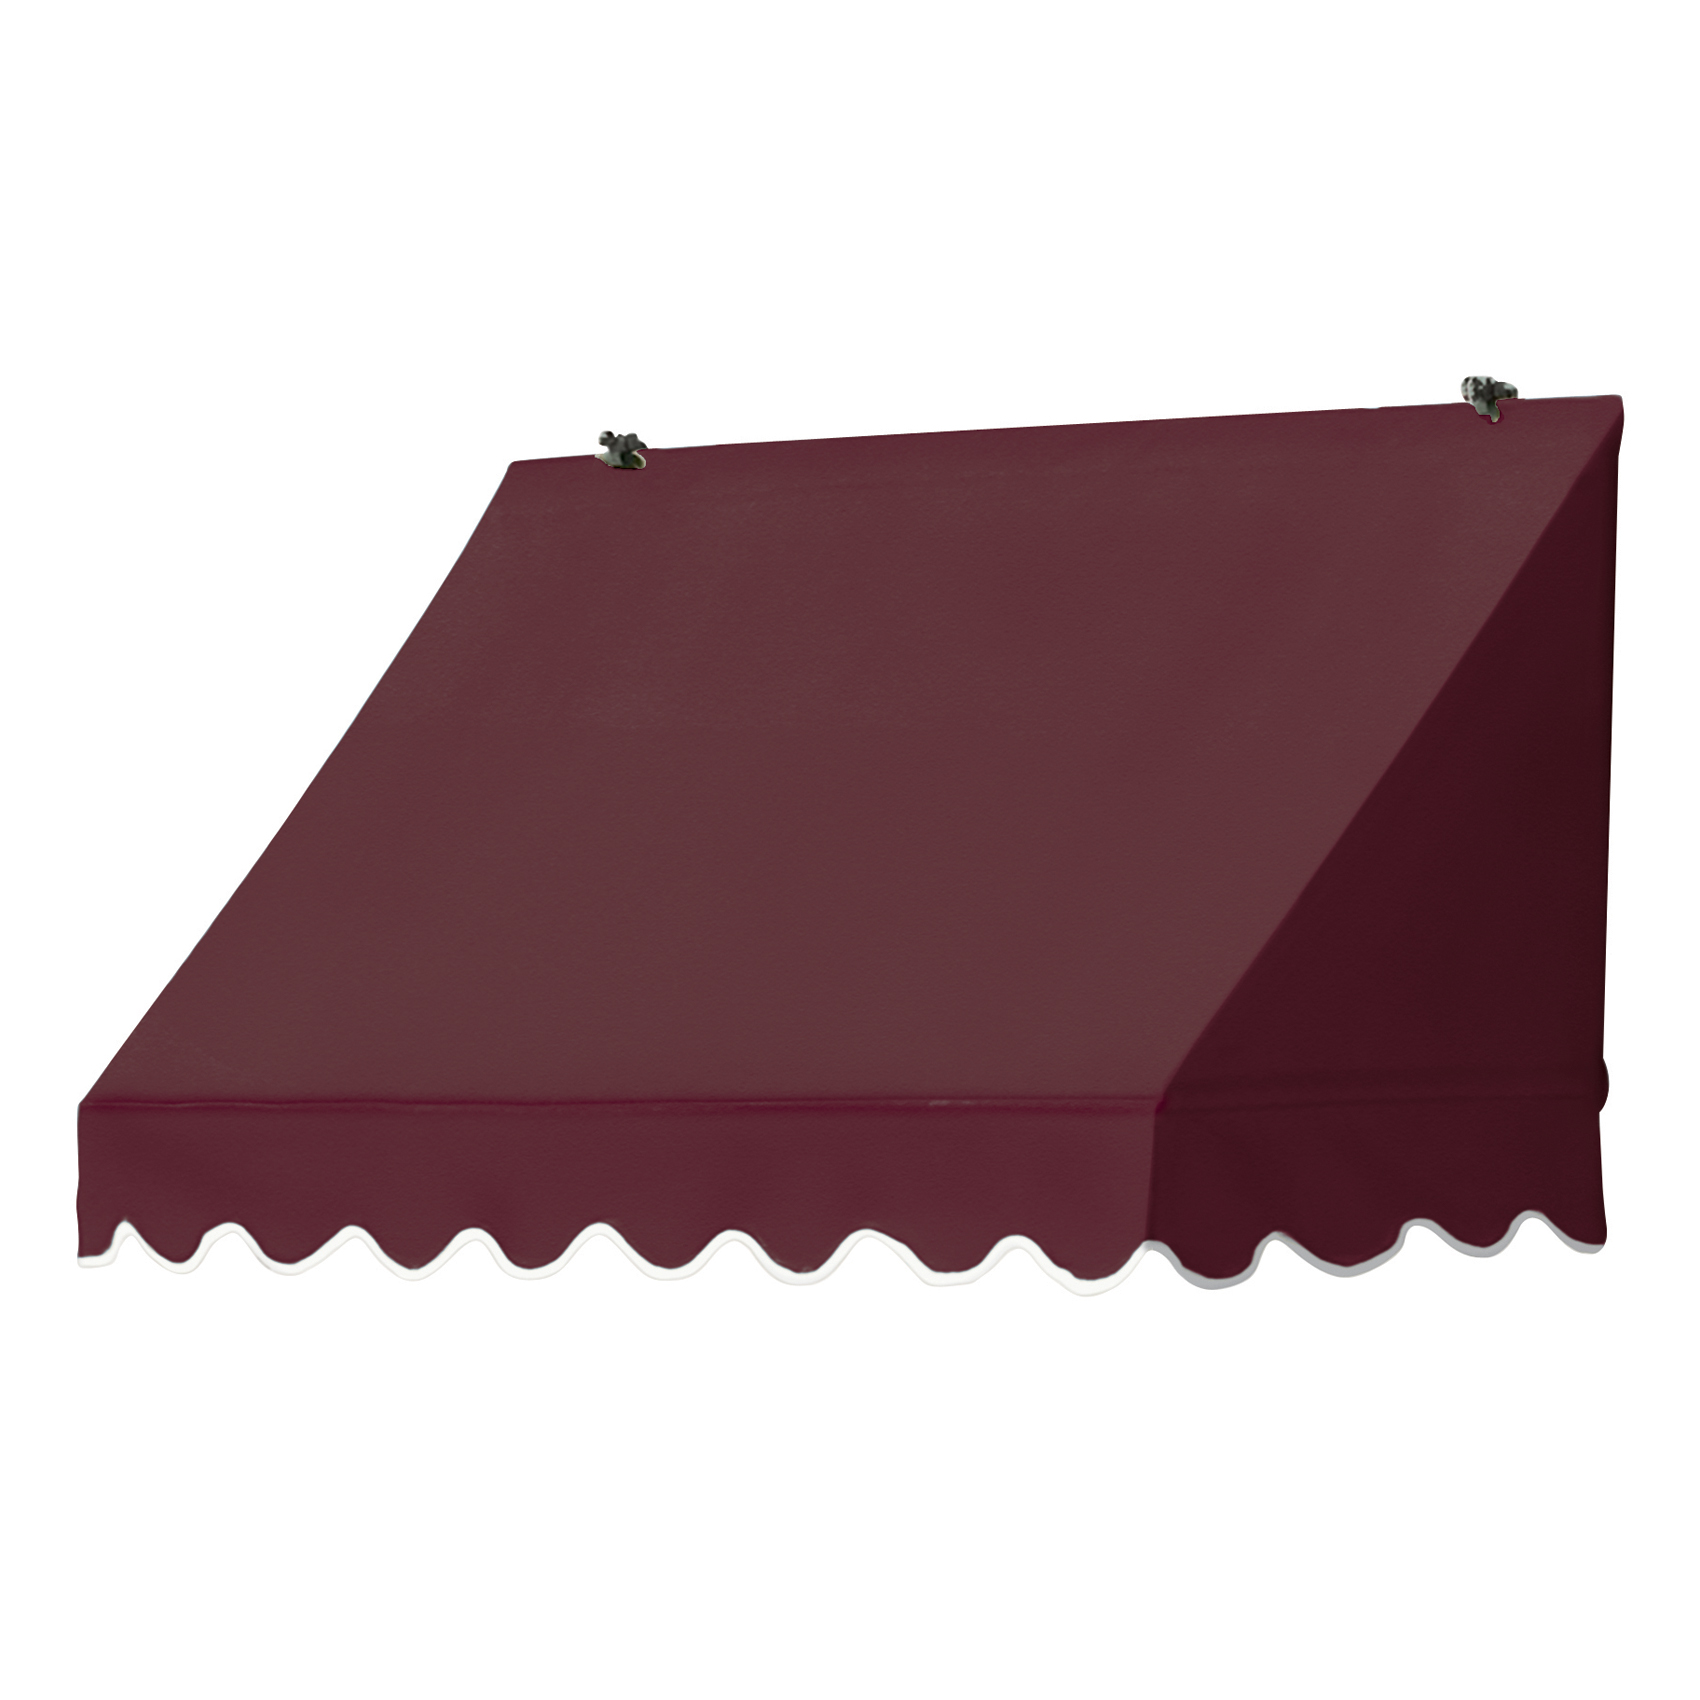 Awnings in a Box&reg; 4' Traditional Style Awning Replacement Cover in Assorted Colors